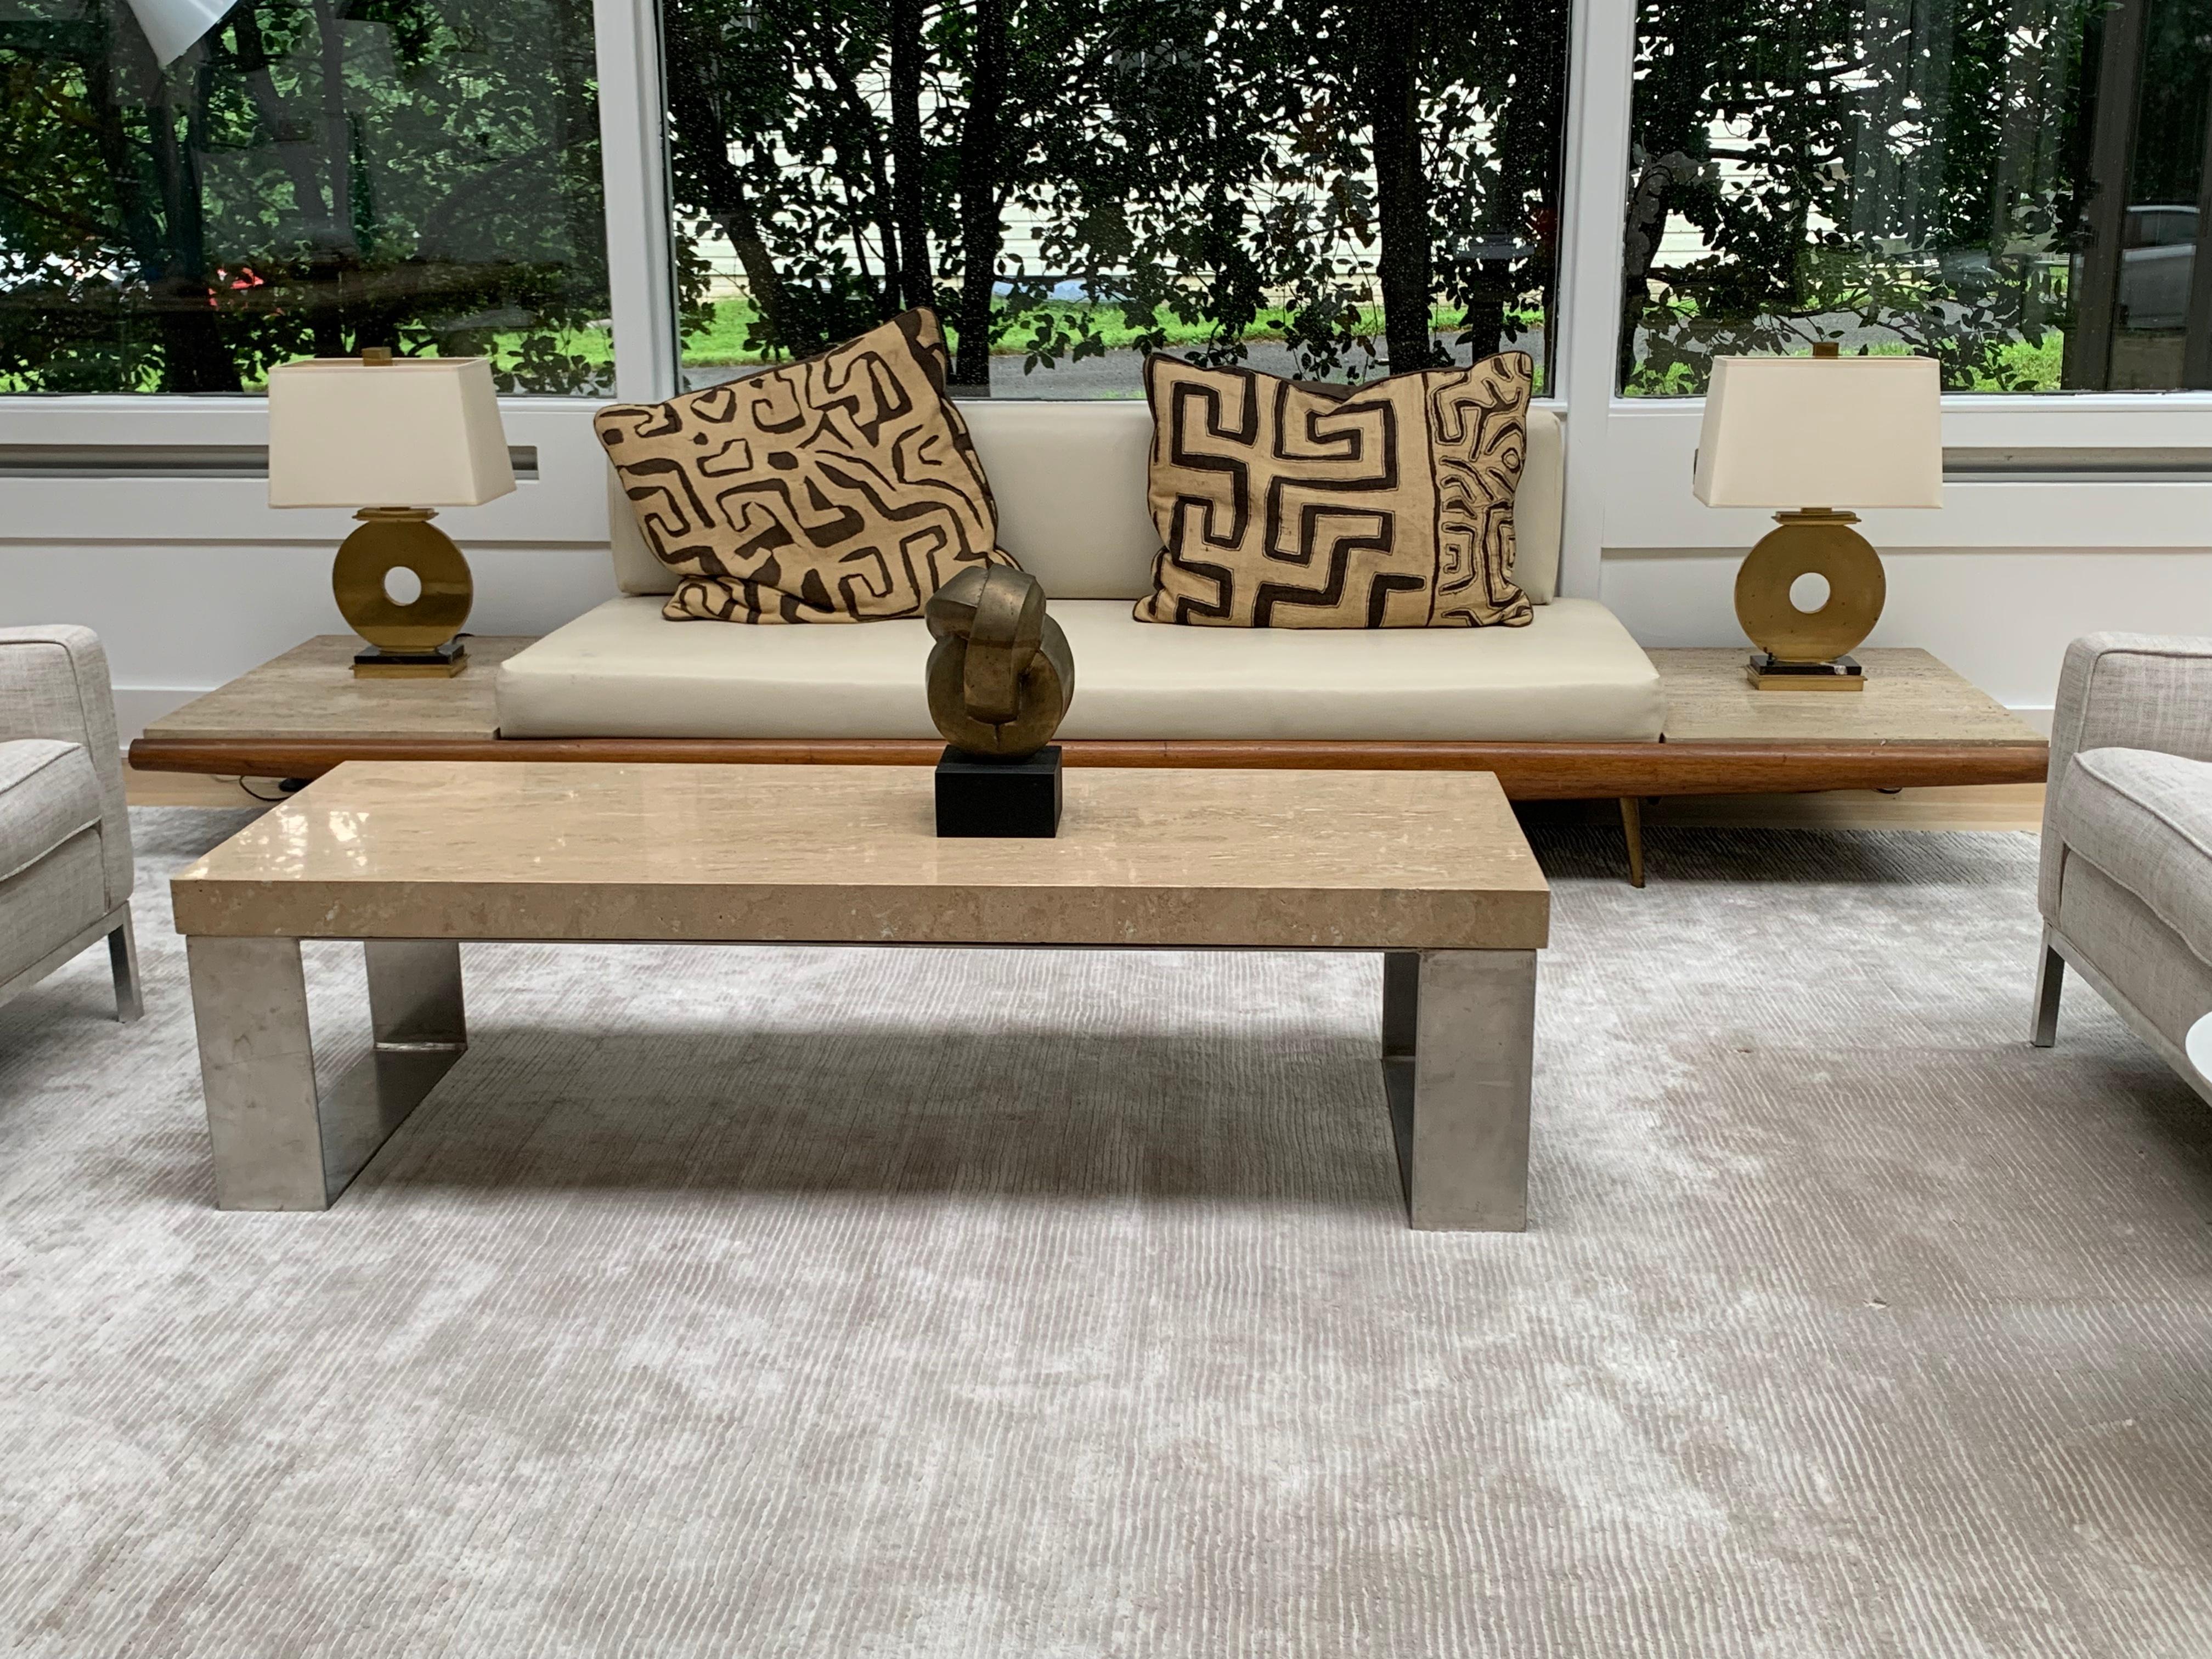 Rare Pearsall Sofa with Travertine Side Tables Built In For Sale 1